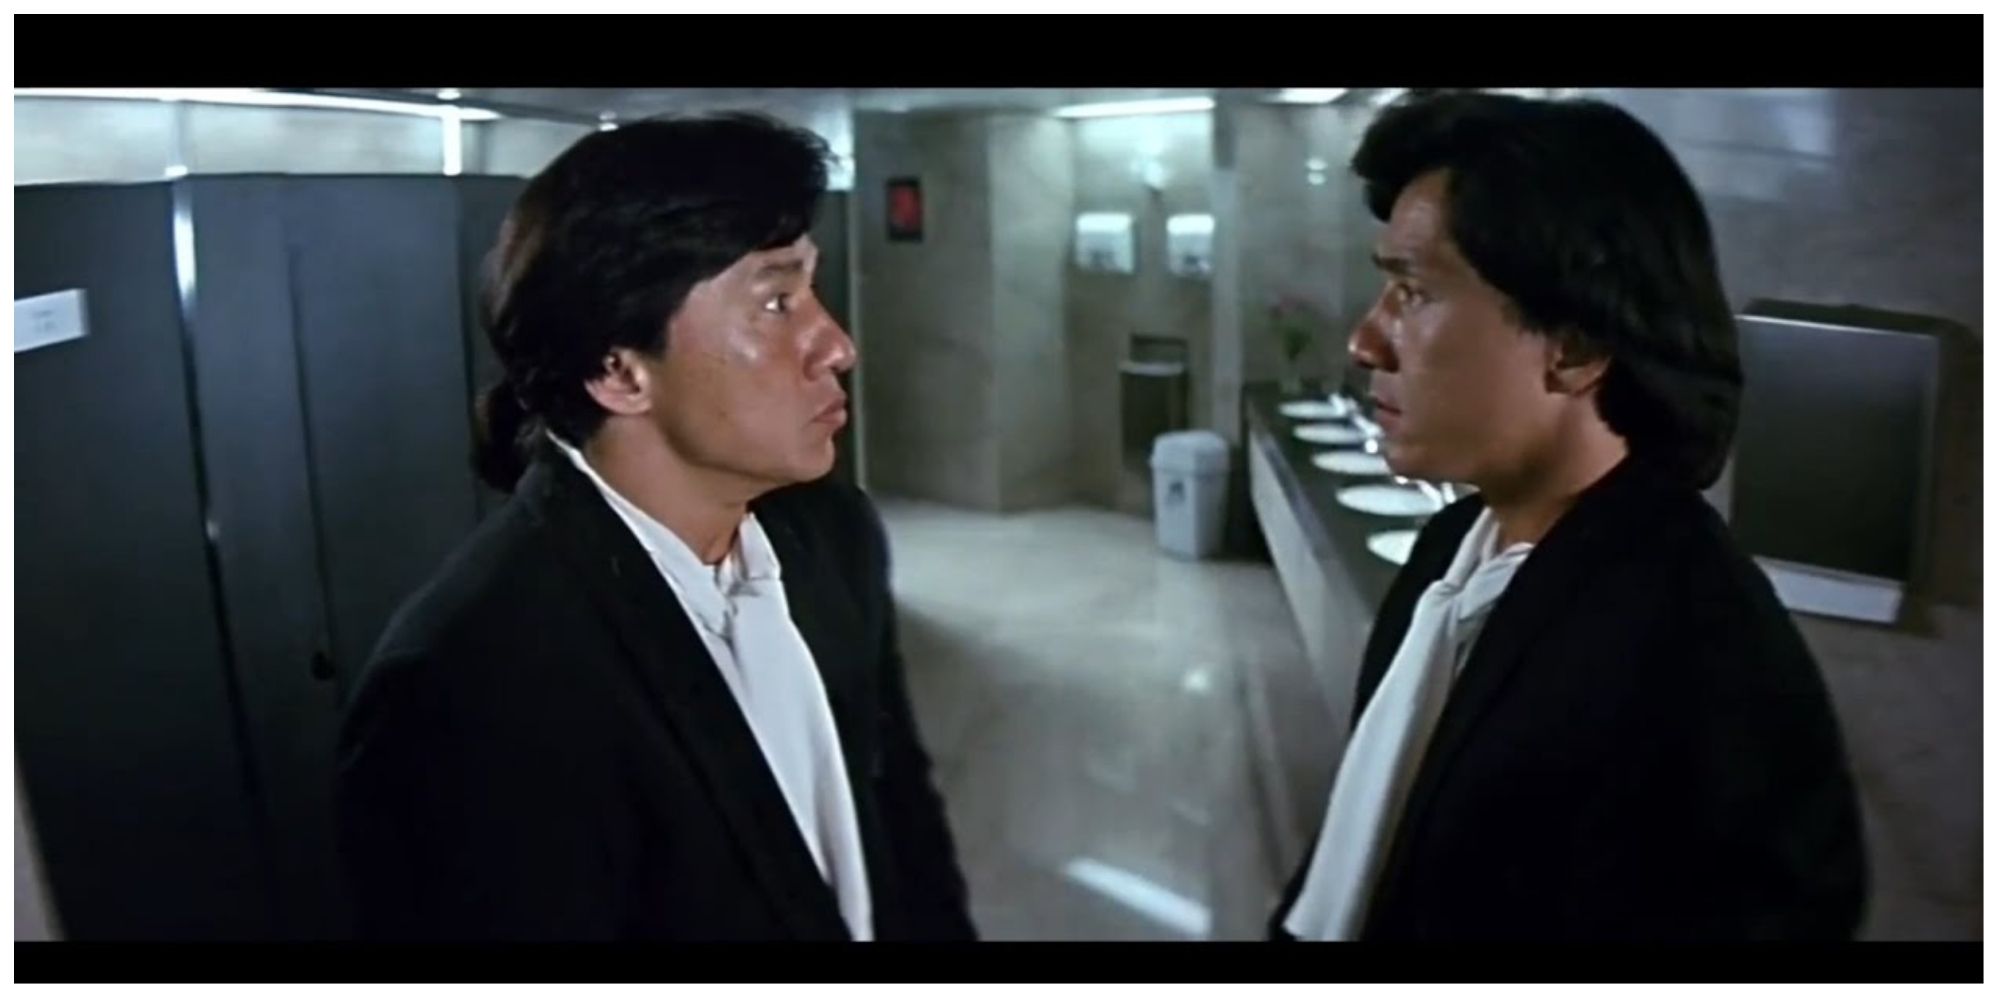 Jackie Chan starring as both twins in Twin Dragons. They are standing in a public bathroom staring at each other in shock.